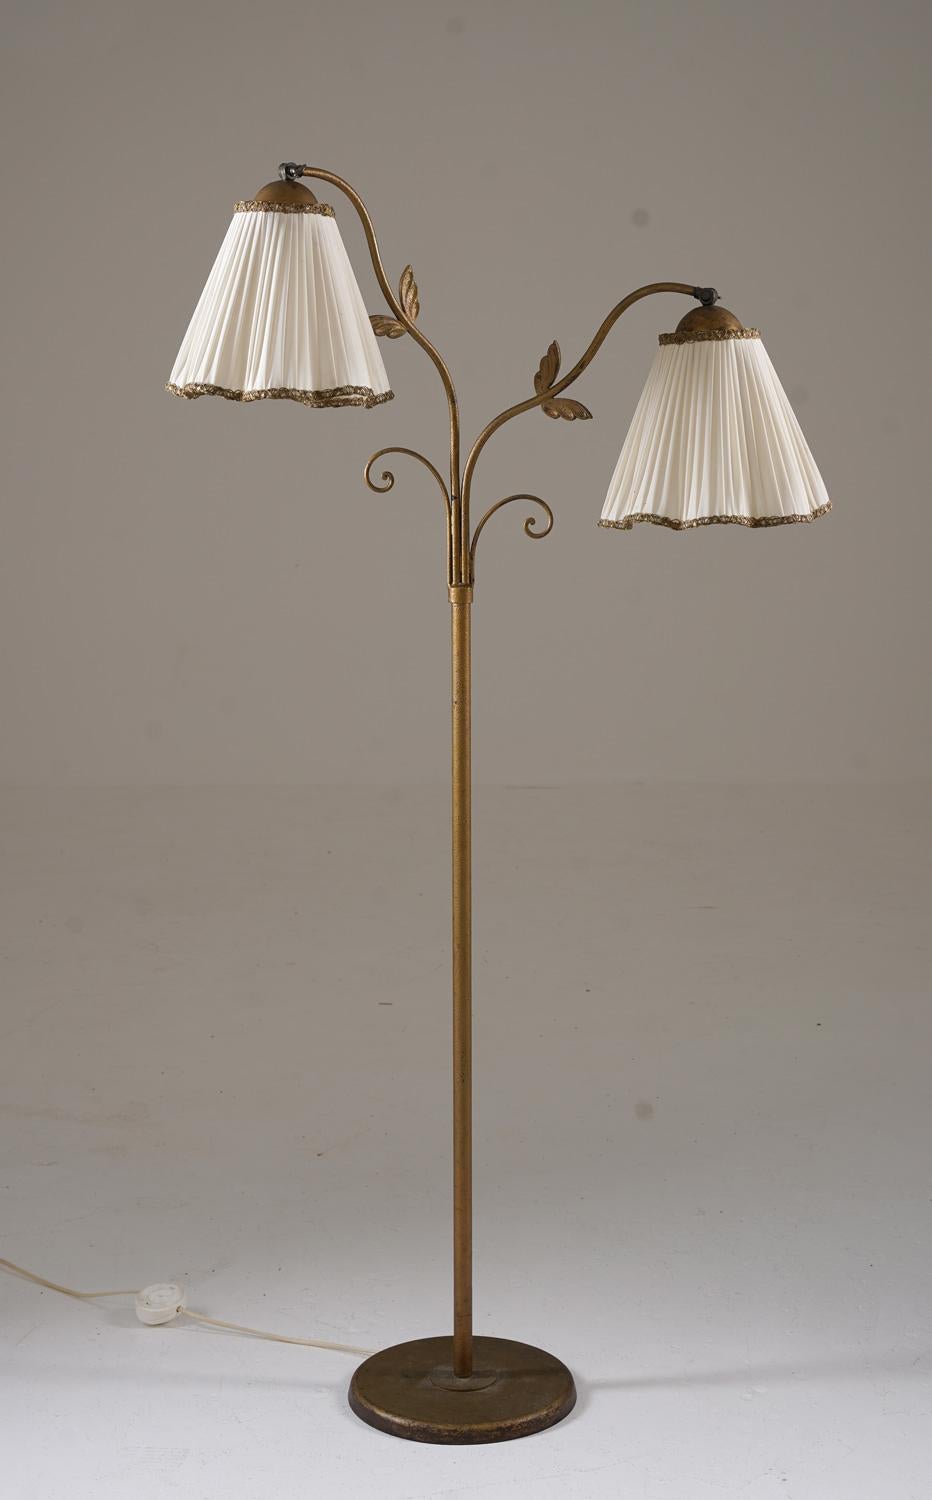 Rare floor lamp by Tor Wolfenstein for Ditzingers, Sweden, 1930s.
This spectacular floor lamp is an interesting example of Swedish design from the beginning of the modernist era, mixing organic shapes with floral ornaments and several different